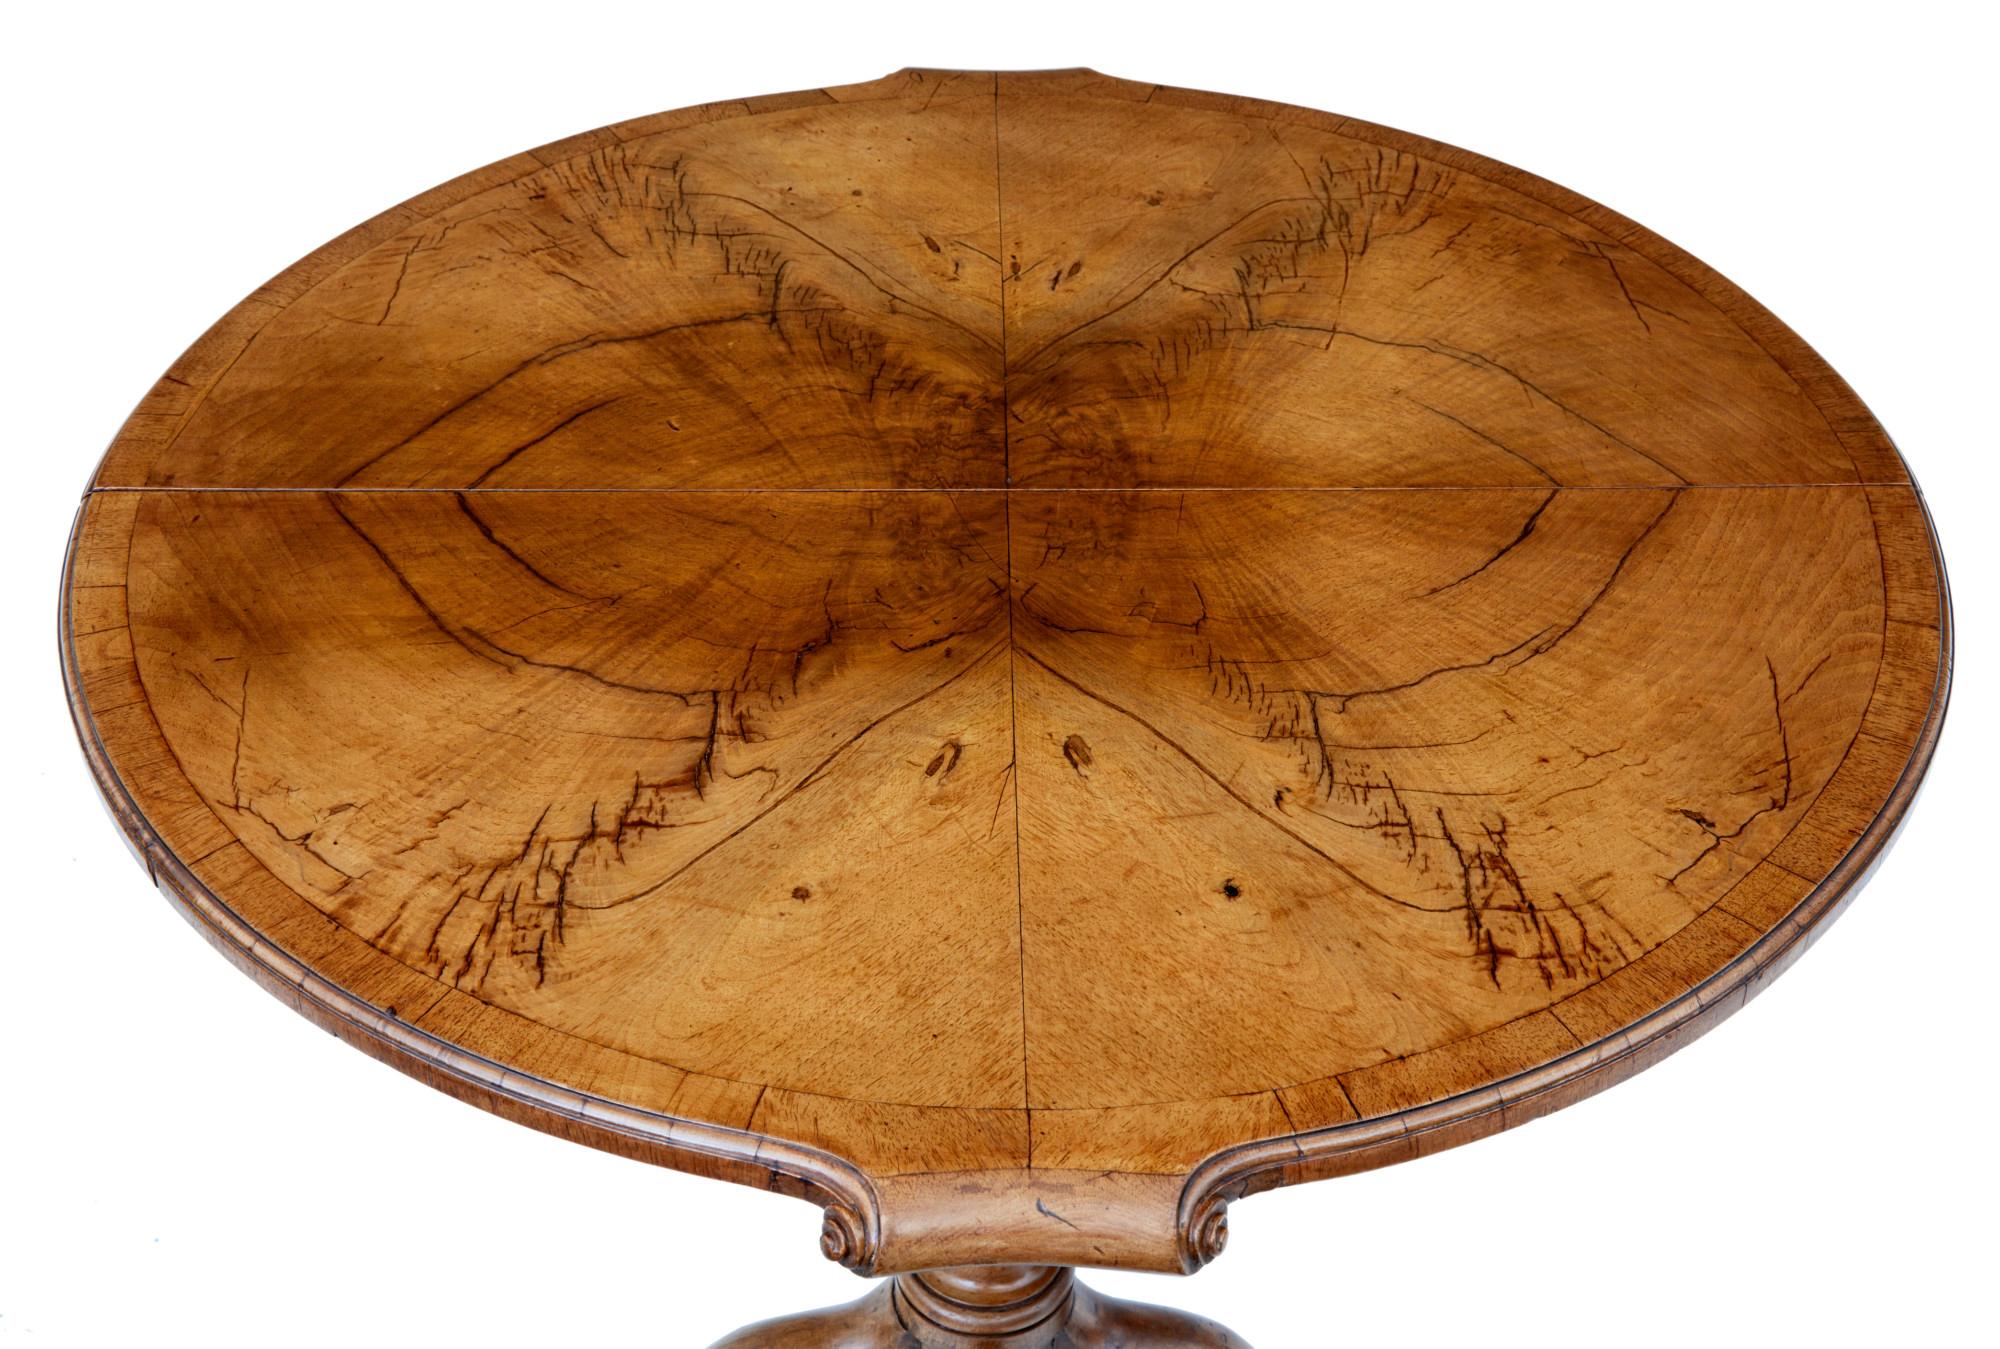 A small English walnut occasional extension table circa 1920 with butterfly veneer top, out-scrolling effects, one removable leaf, turned pedestal base and four curving legs. Add a touch of timeless elegance to your space with this English